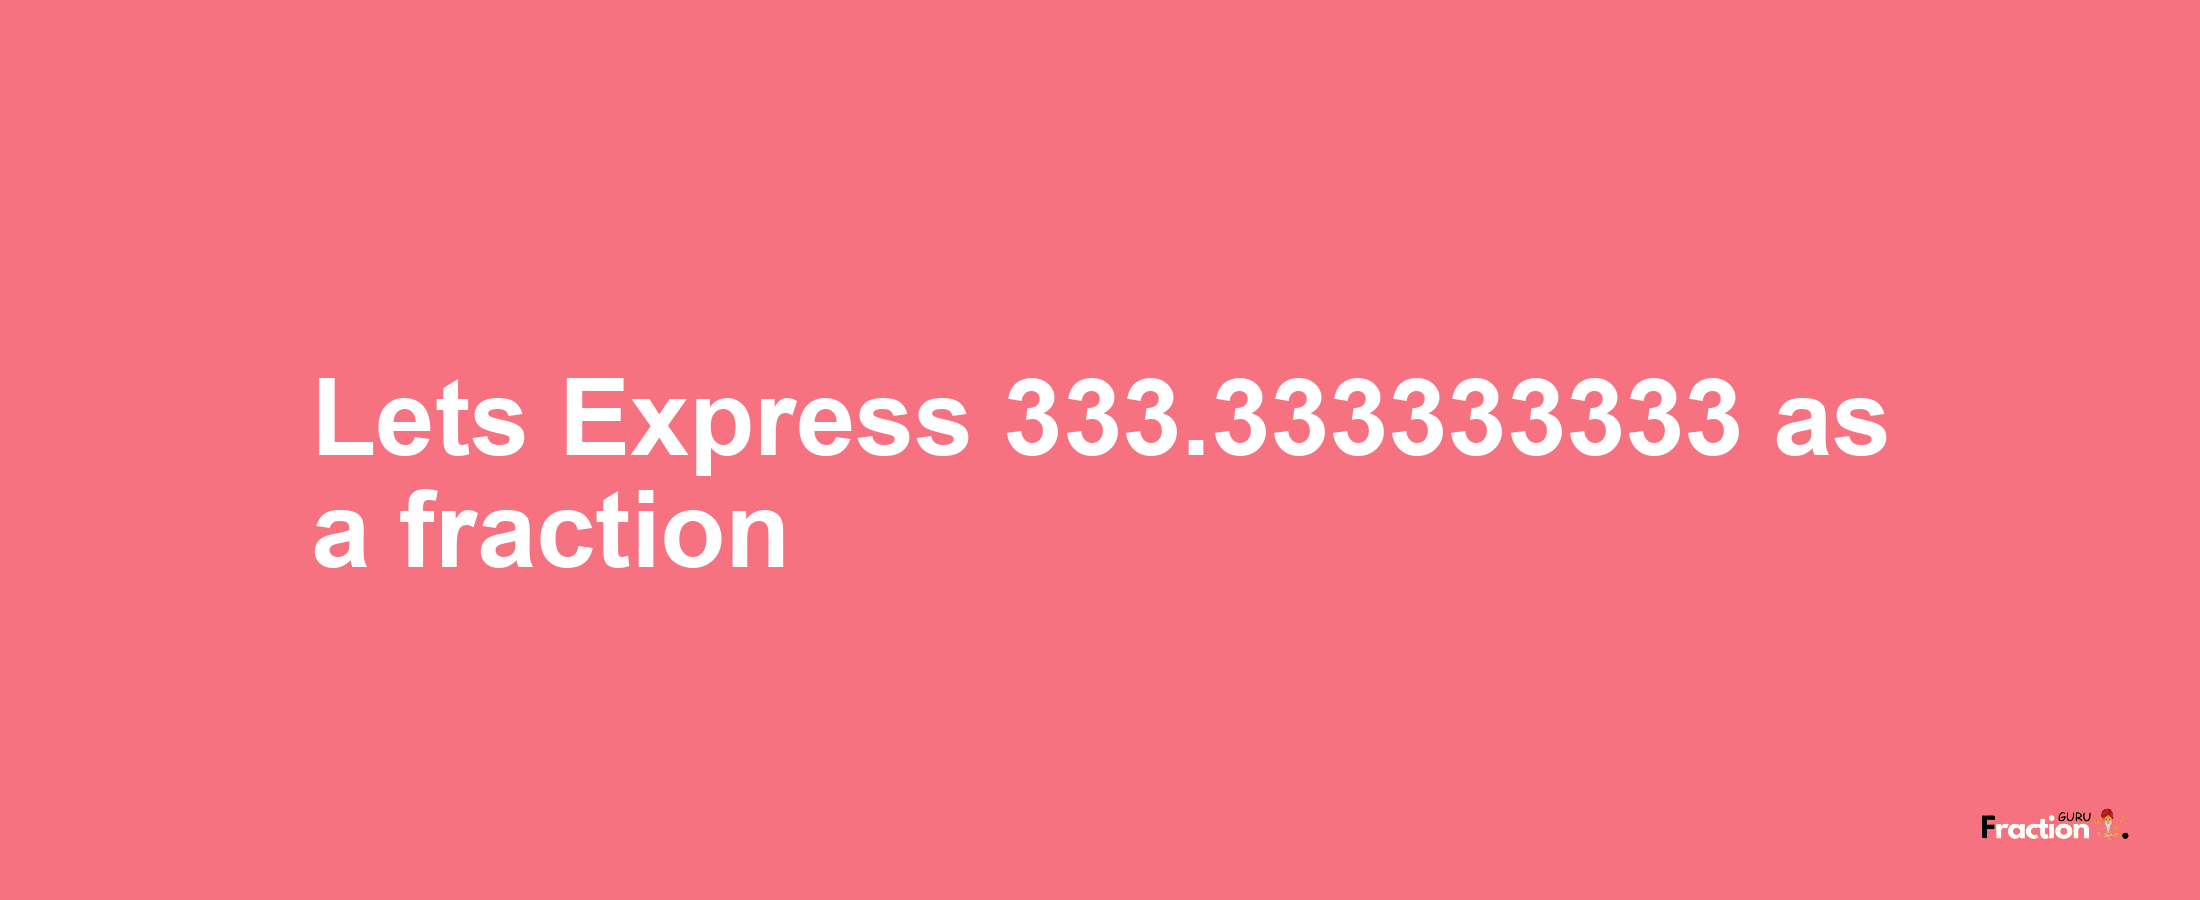 Lets Express 333.333333333 as afraction